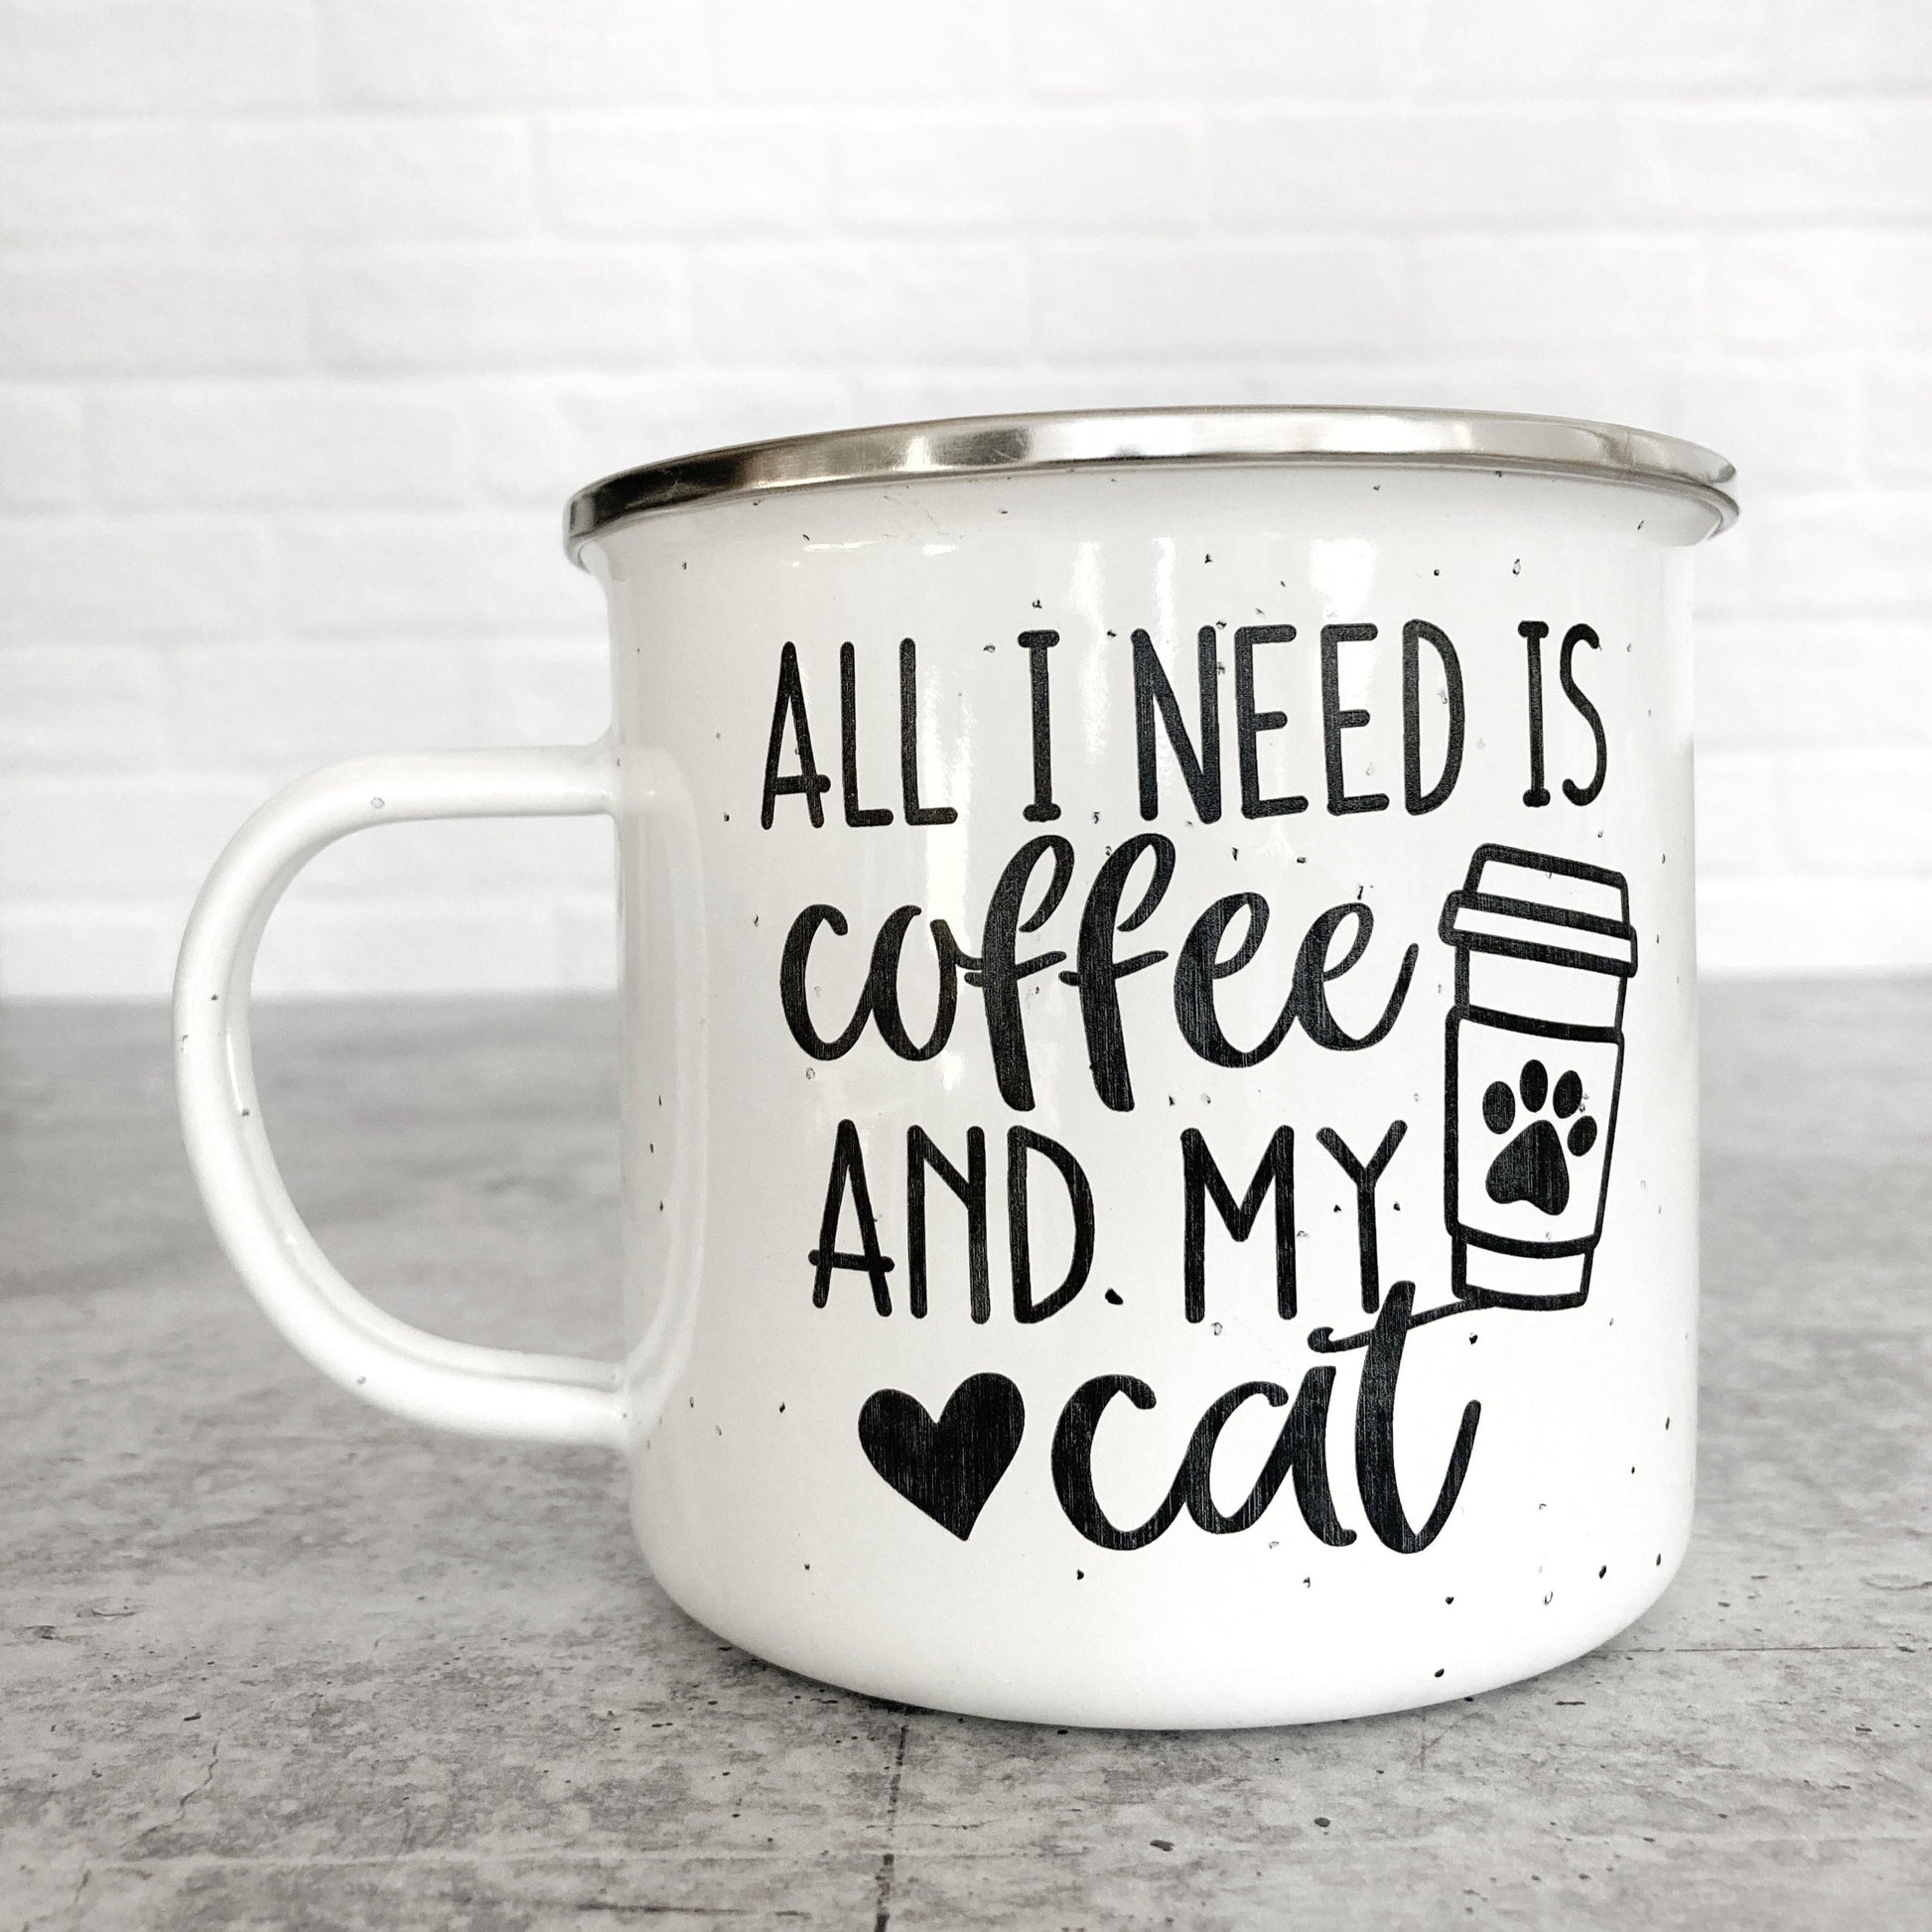 All I Need Is Coffee And My Cat design on a white enamel mug